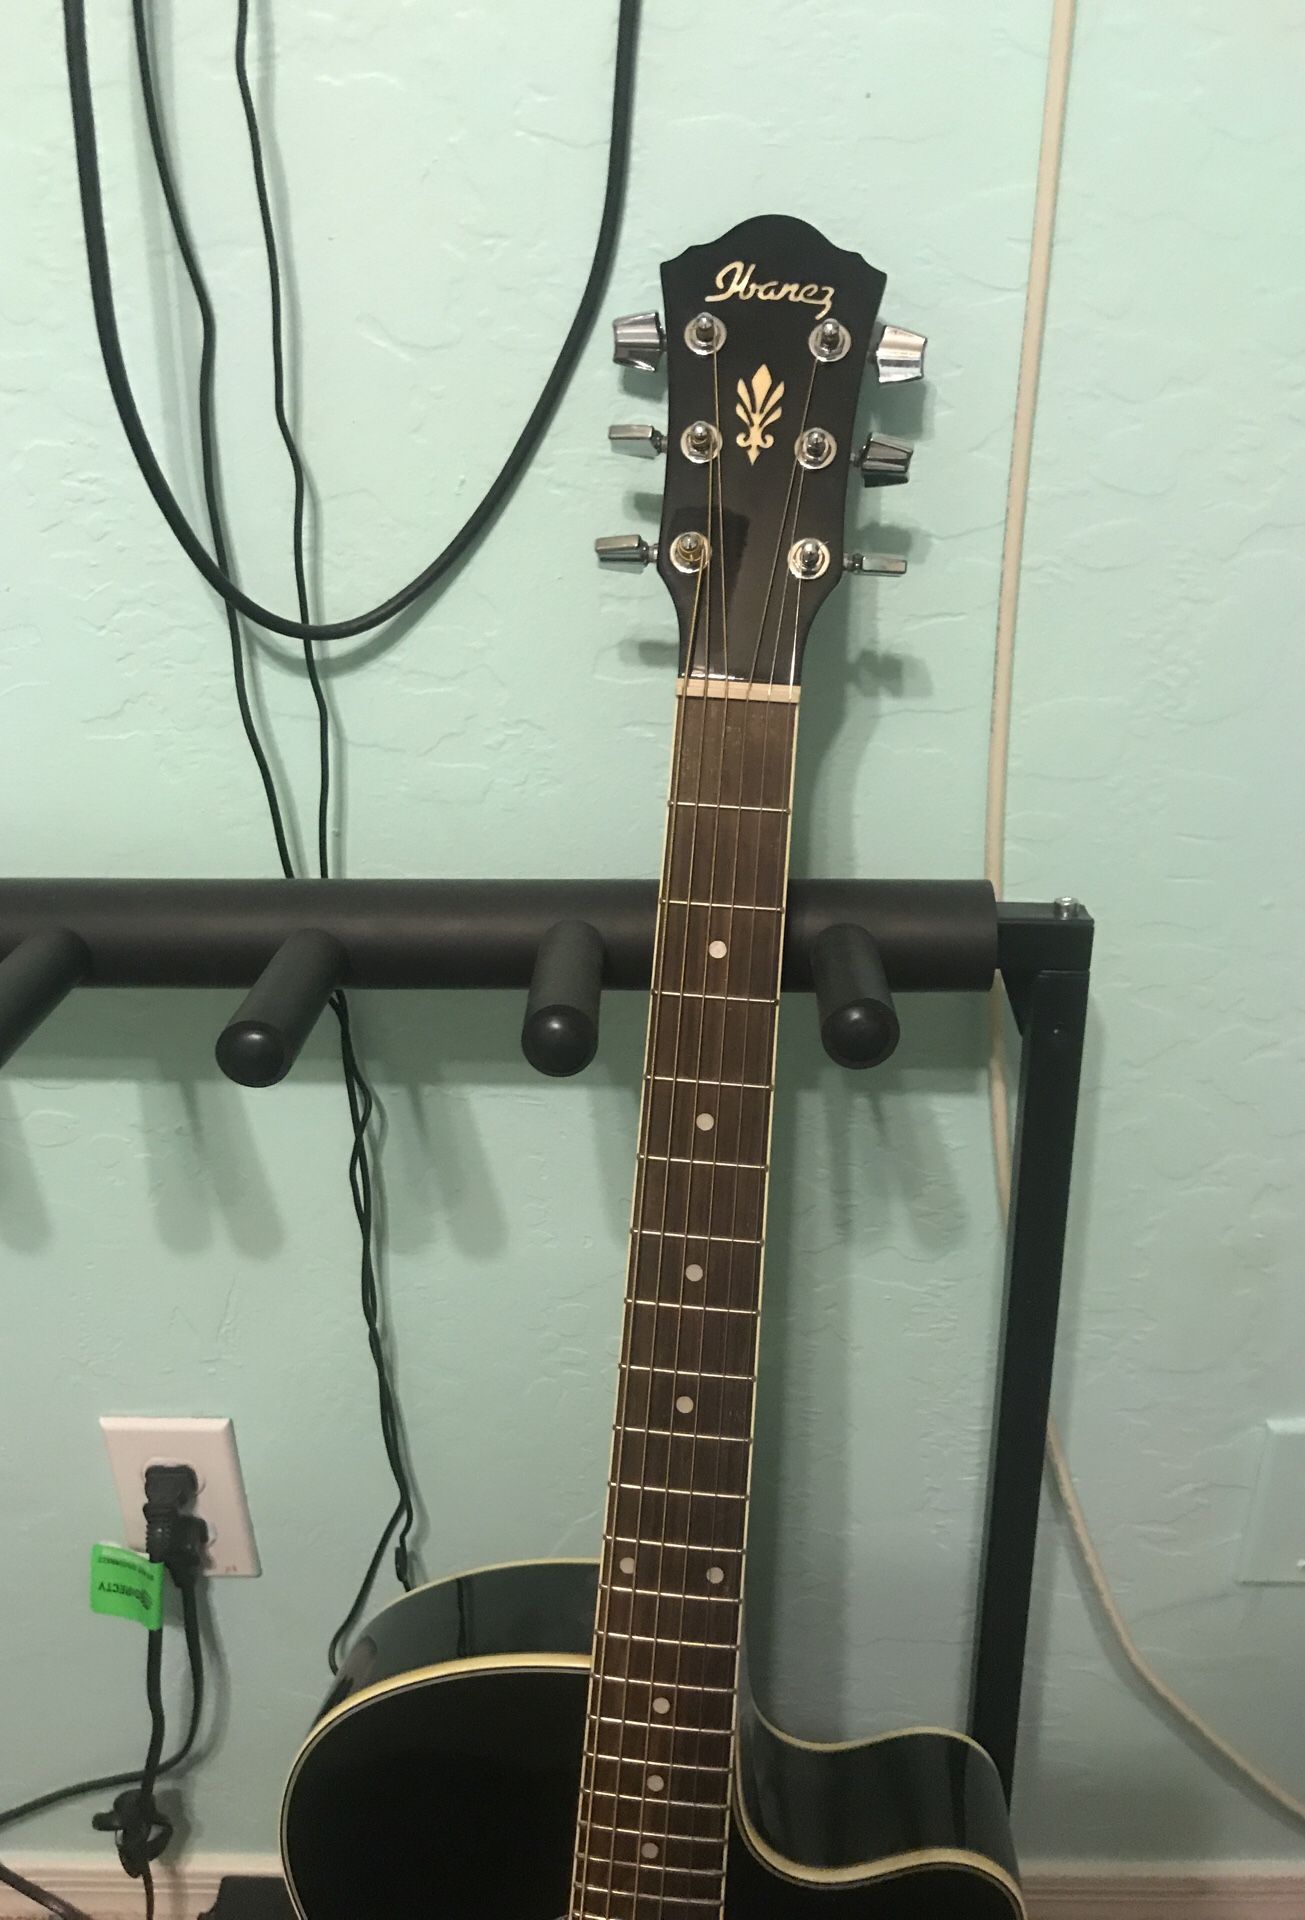 Guitar-Ibanez acoustic in great condition, just needs a clean up